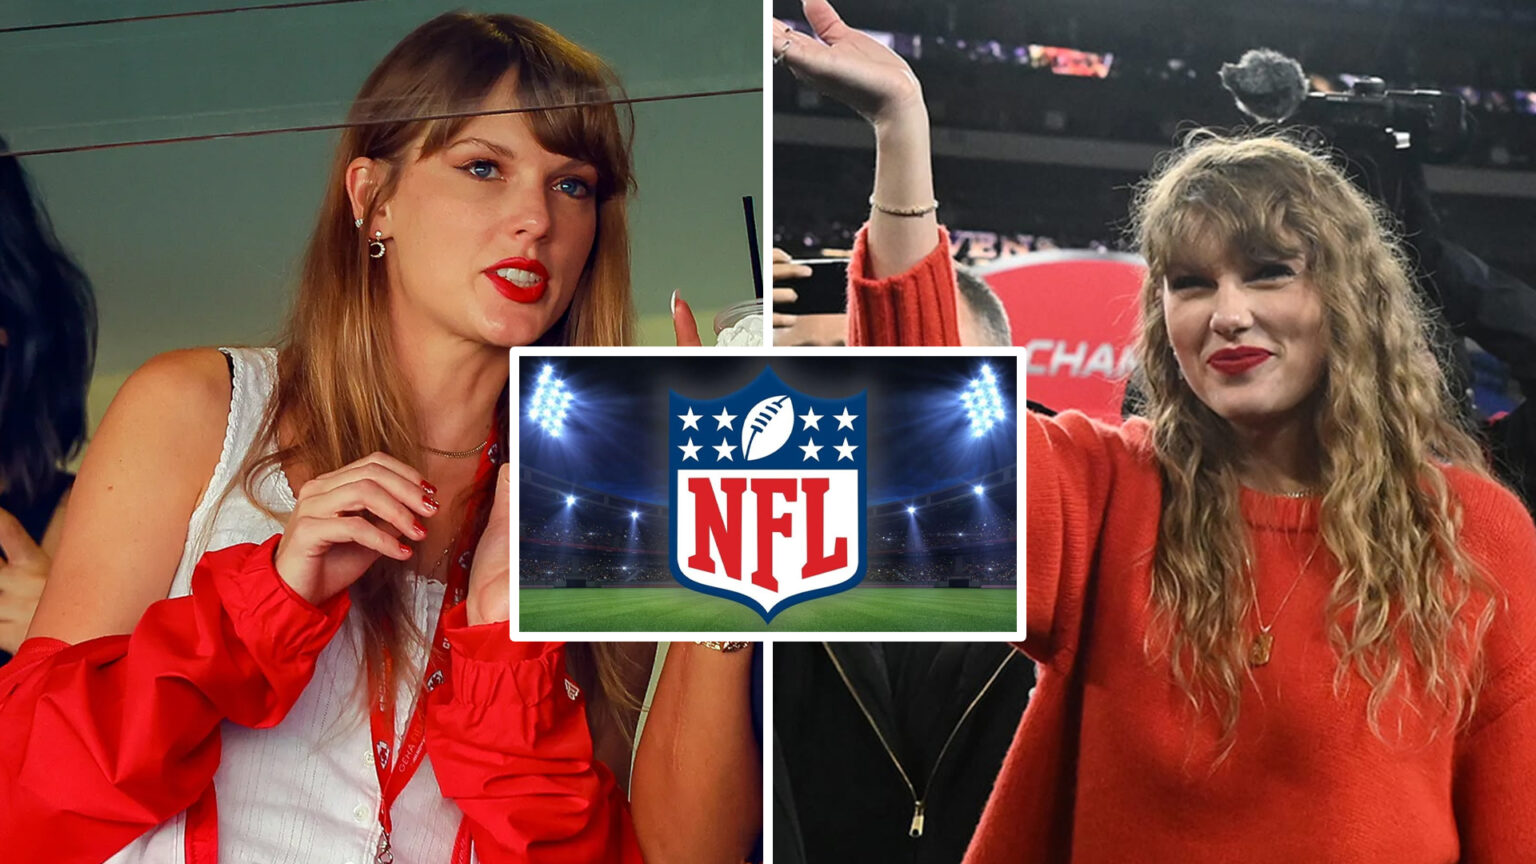 Breaking: NFL Bans Taylor Swift From Super Bowl, “She’s Too Distracting”